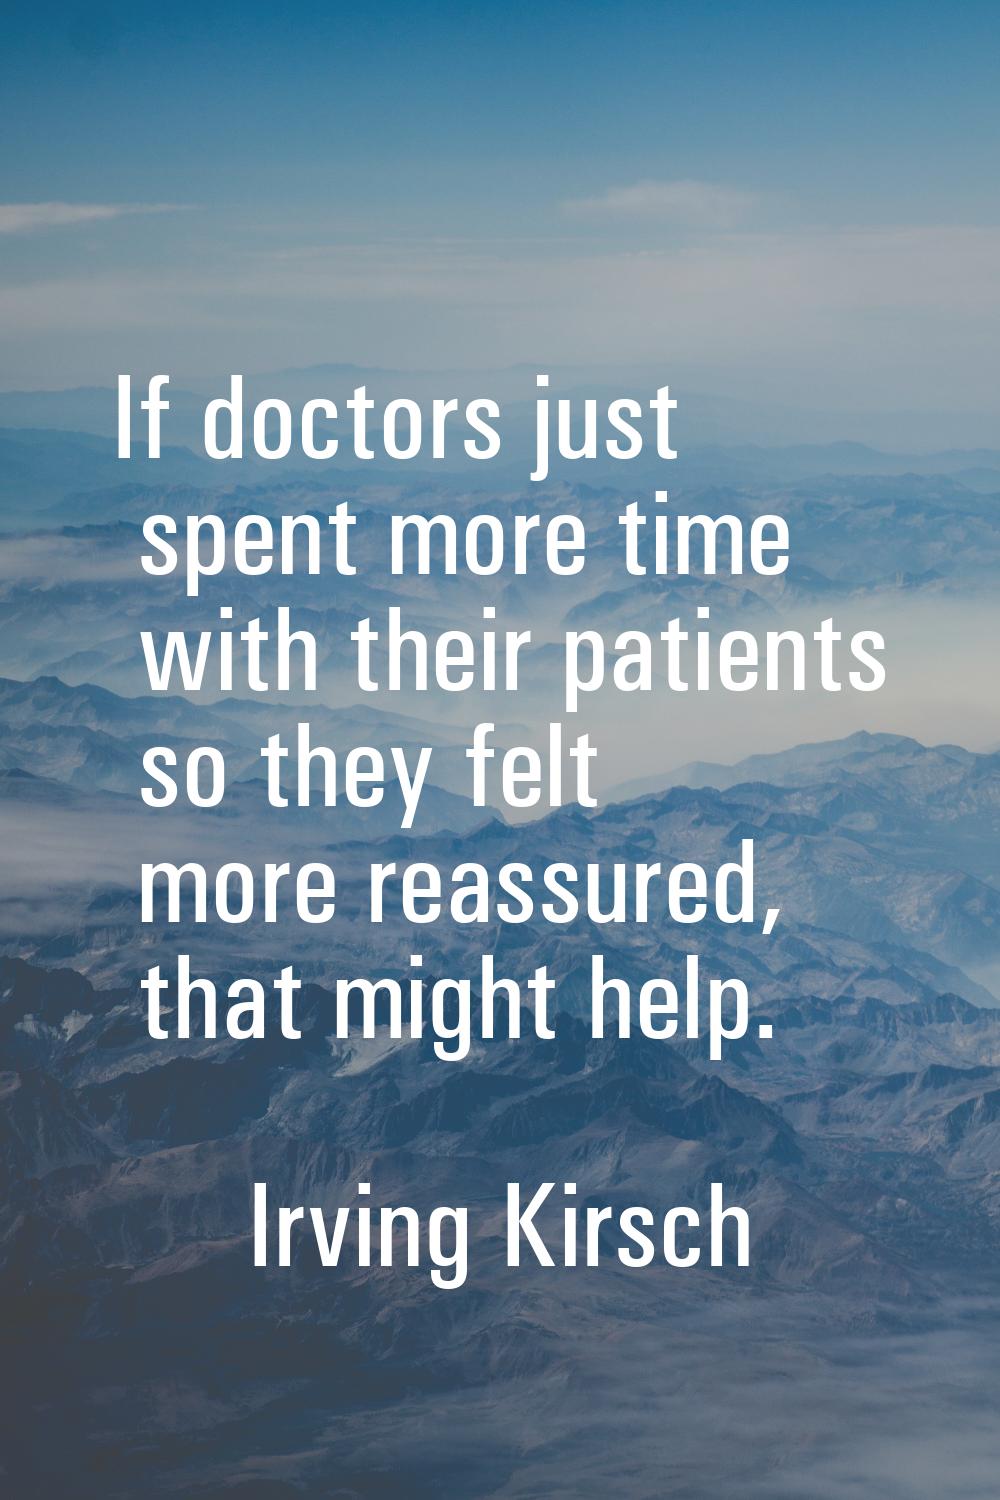 If doctors just spent more time with their patients so they felt more reassured, that might help.